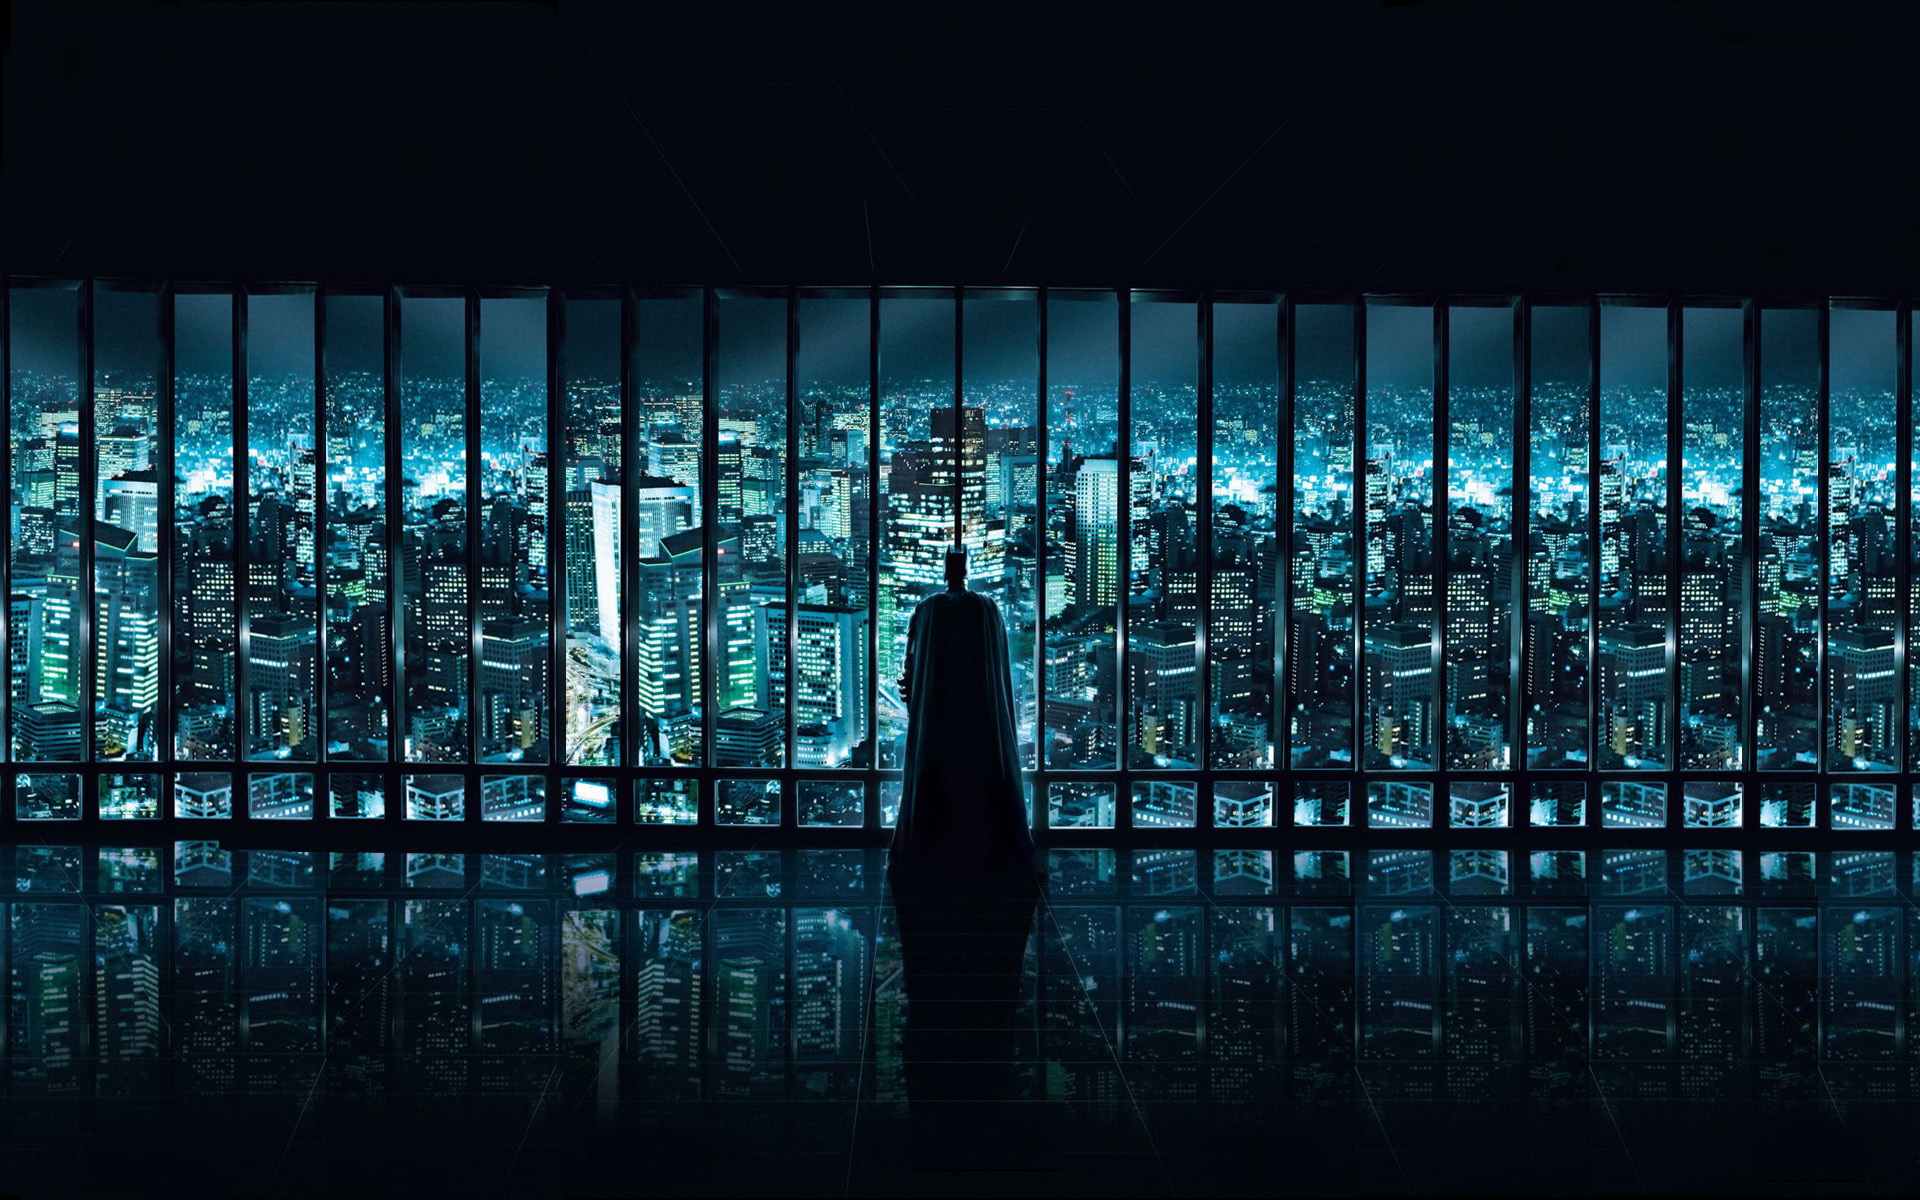 at Gotham City wallpapers are presented on the website Wallpaper